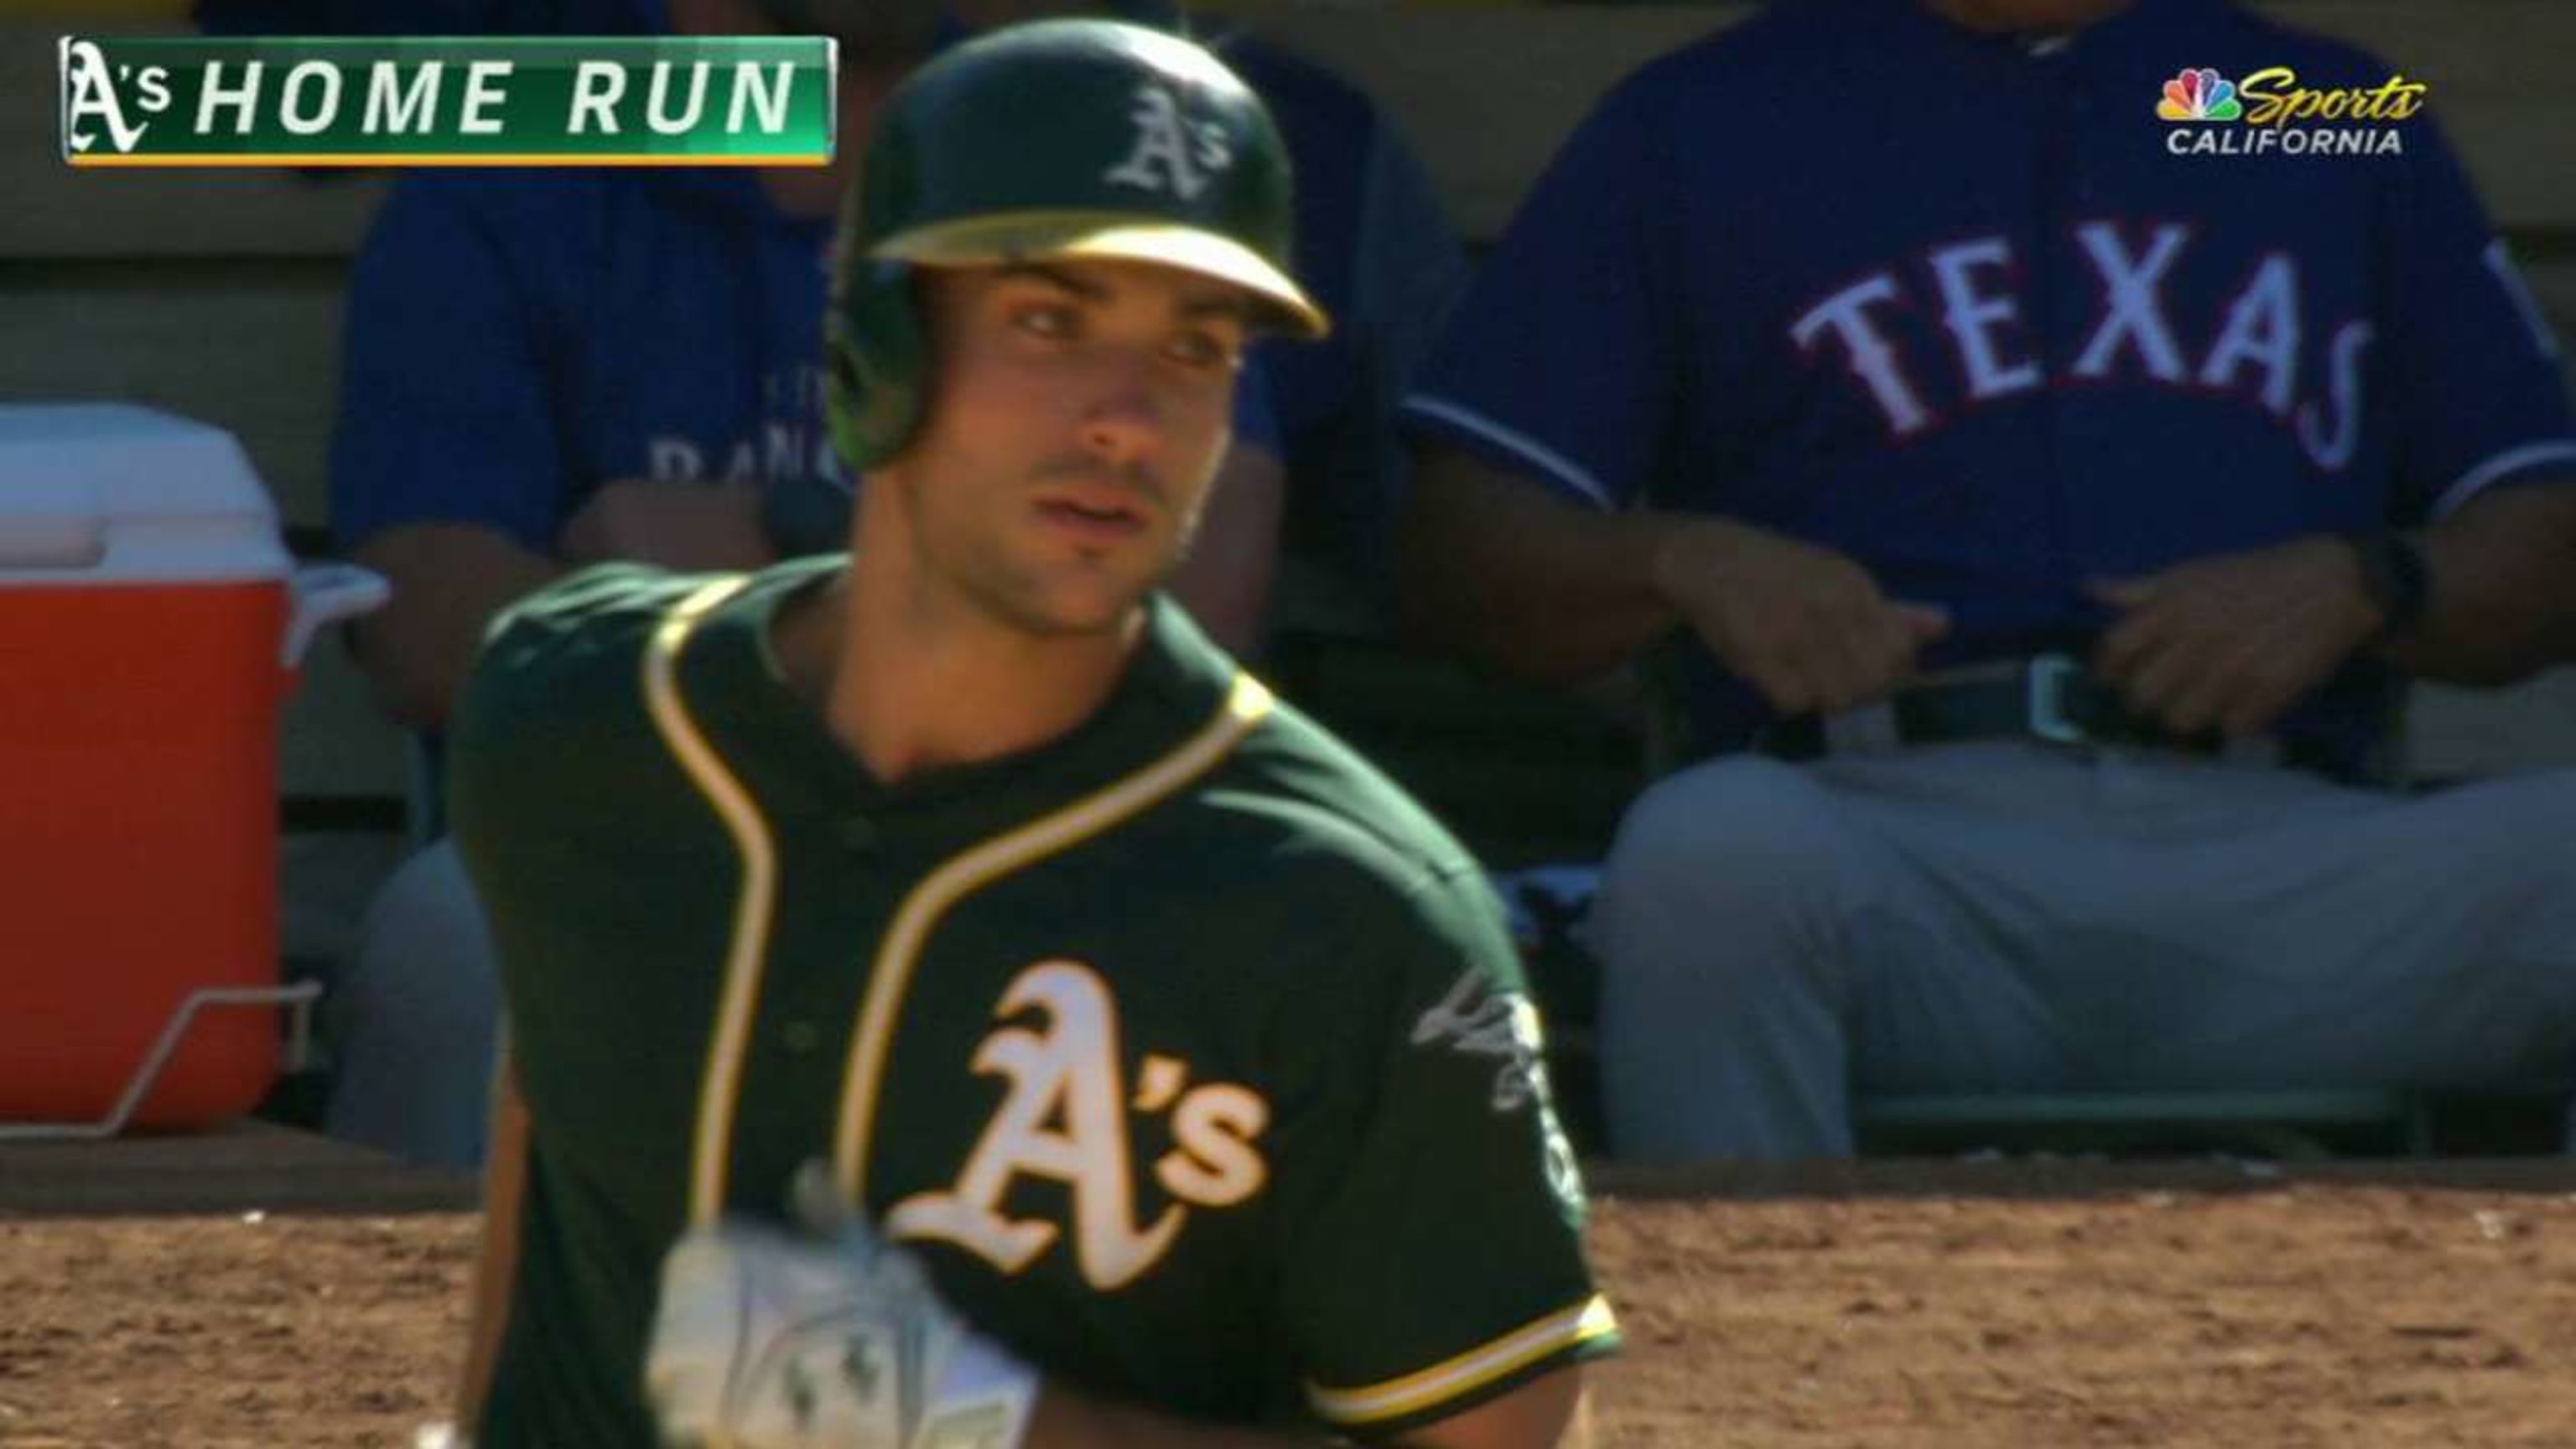 Khris Davis goes 2-for-3 in first game back with Oakland A's